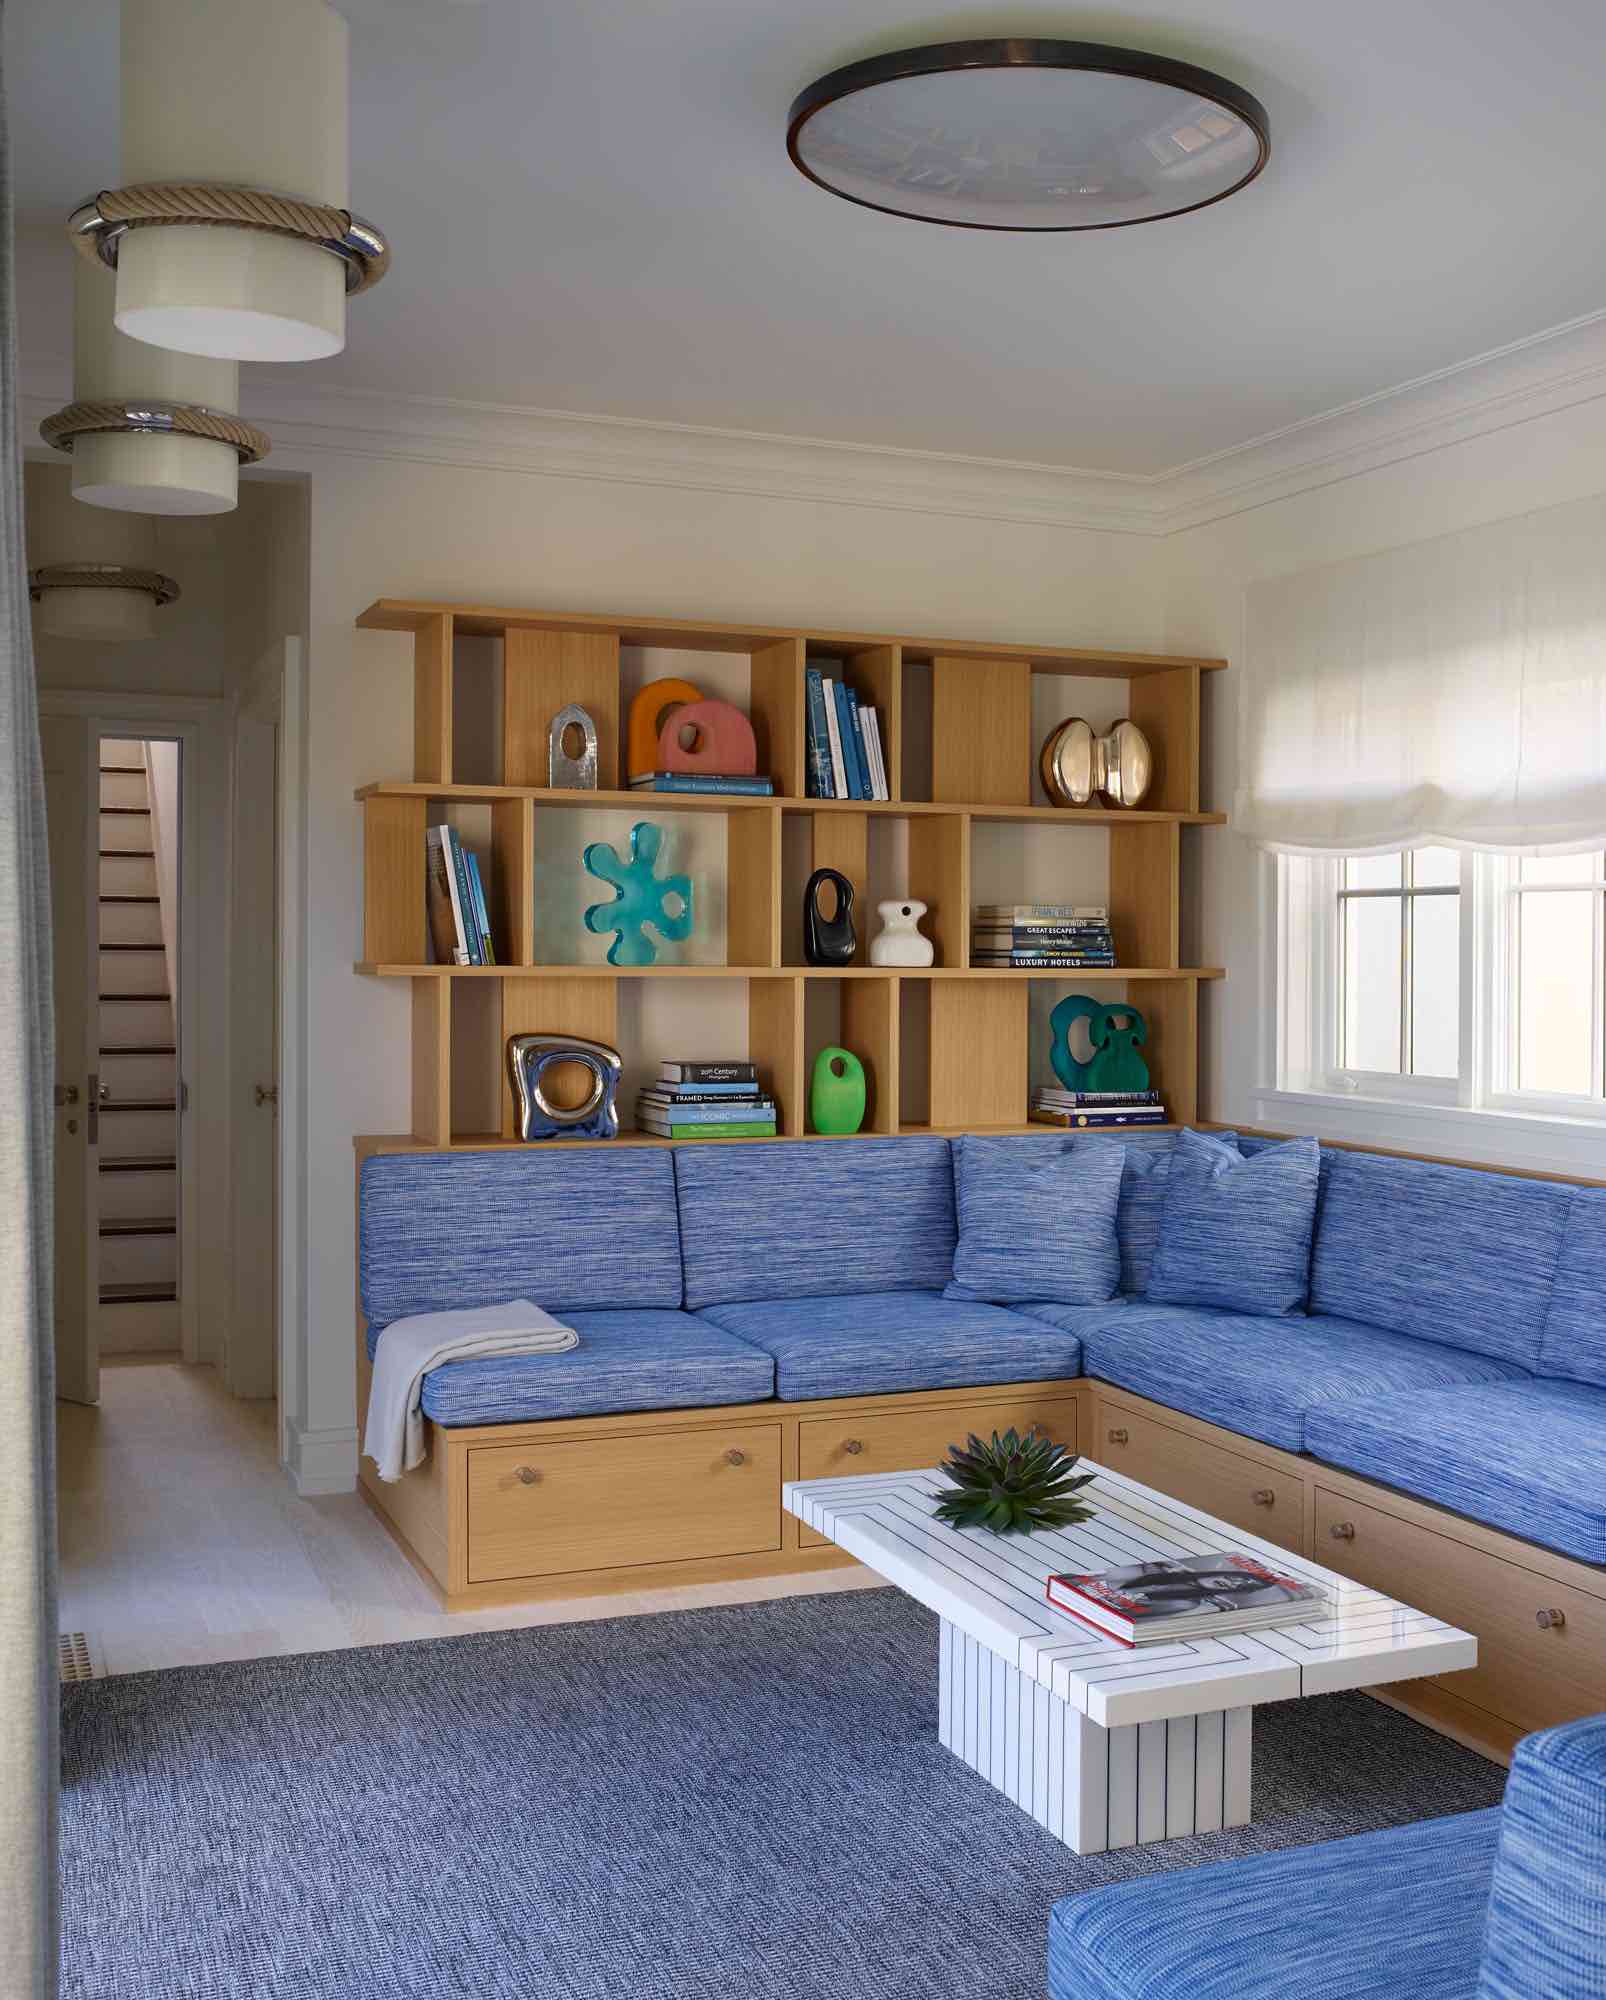 This image shows a built-in bookcase and seating nook in white rift oak designed by Carol Egan.  The ceiling fixture is a flush mounted Vintage 1960 patinated metal circular ceiling light, and the adjoining hallway shows the sailor pendant lights by Thomas Boog.  There is a custom area rug by Sam Kasten along with custom handwoven acrylic fabric for sofa by Sam Kasten on the banquette.  Sculptures by Mia Fonssagrives are displayed in the bookcases and a Daytona 200 coffee table by Peter Dayton.